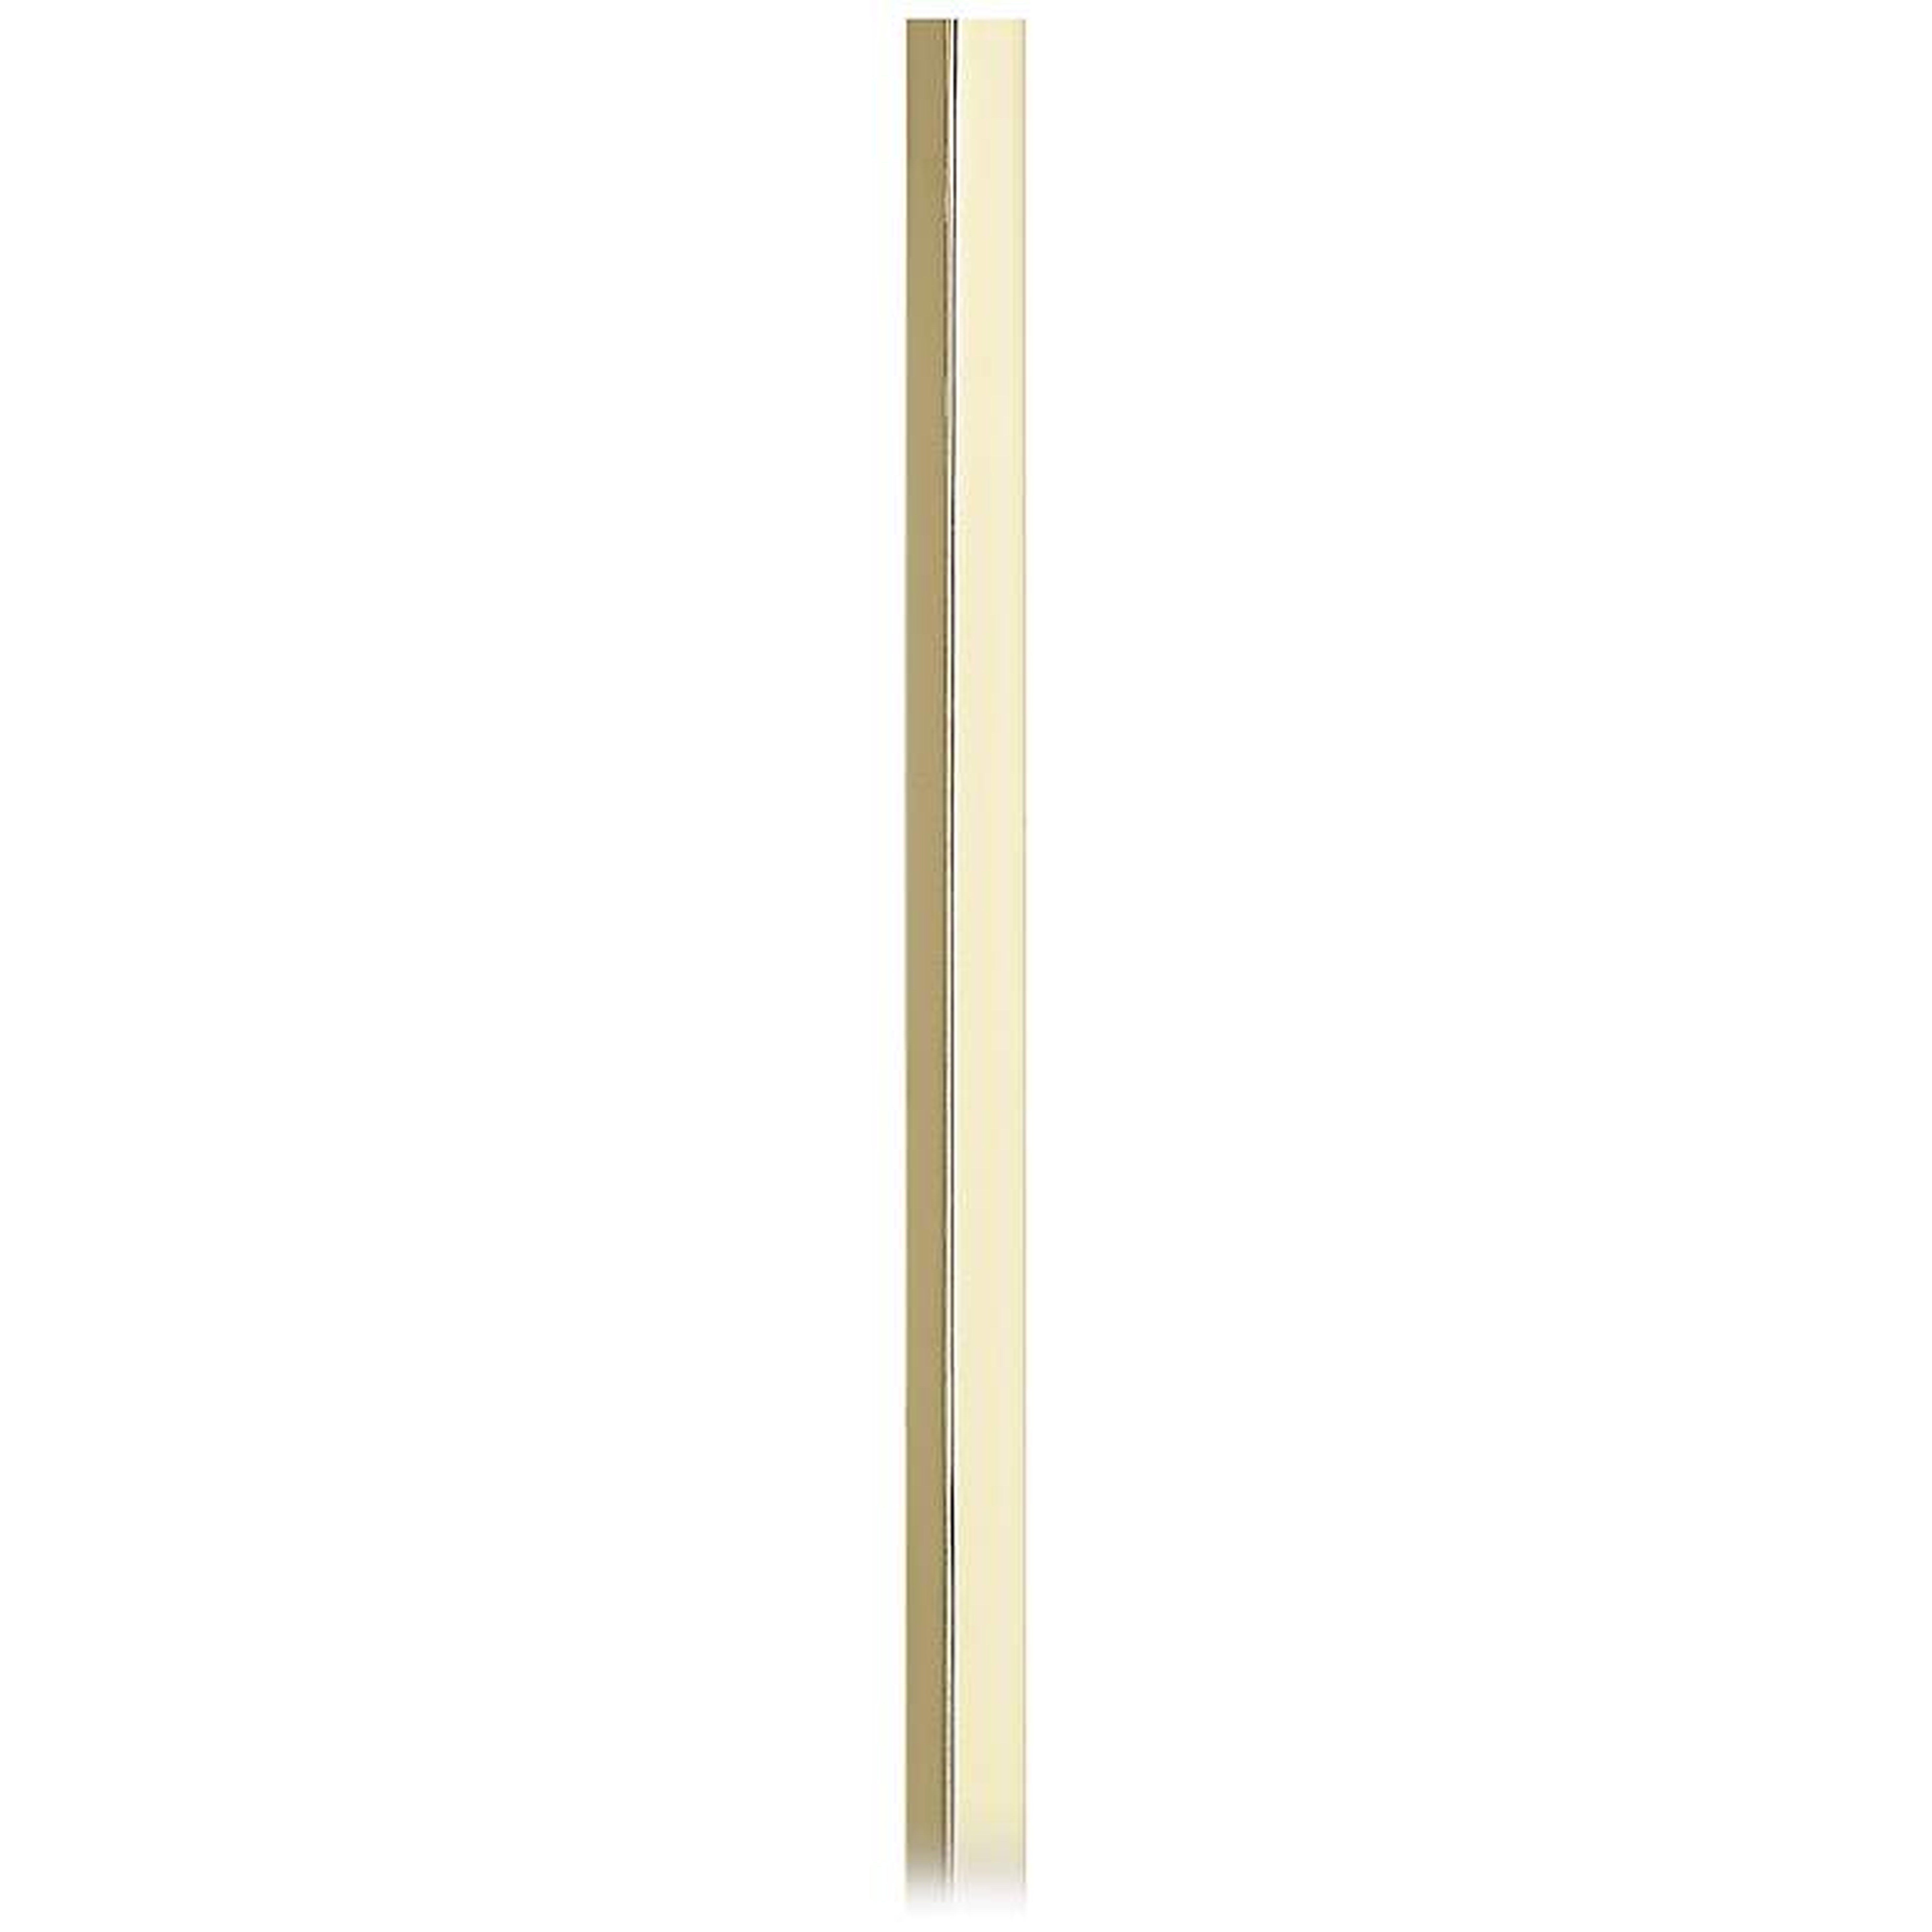 30" Long Polished Brass Cord Cover - Lamps Plus